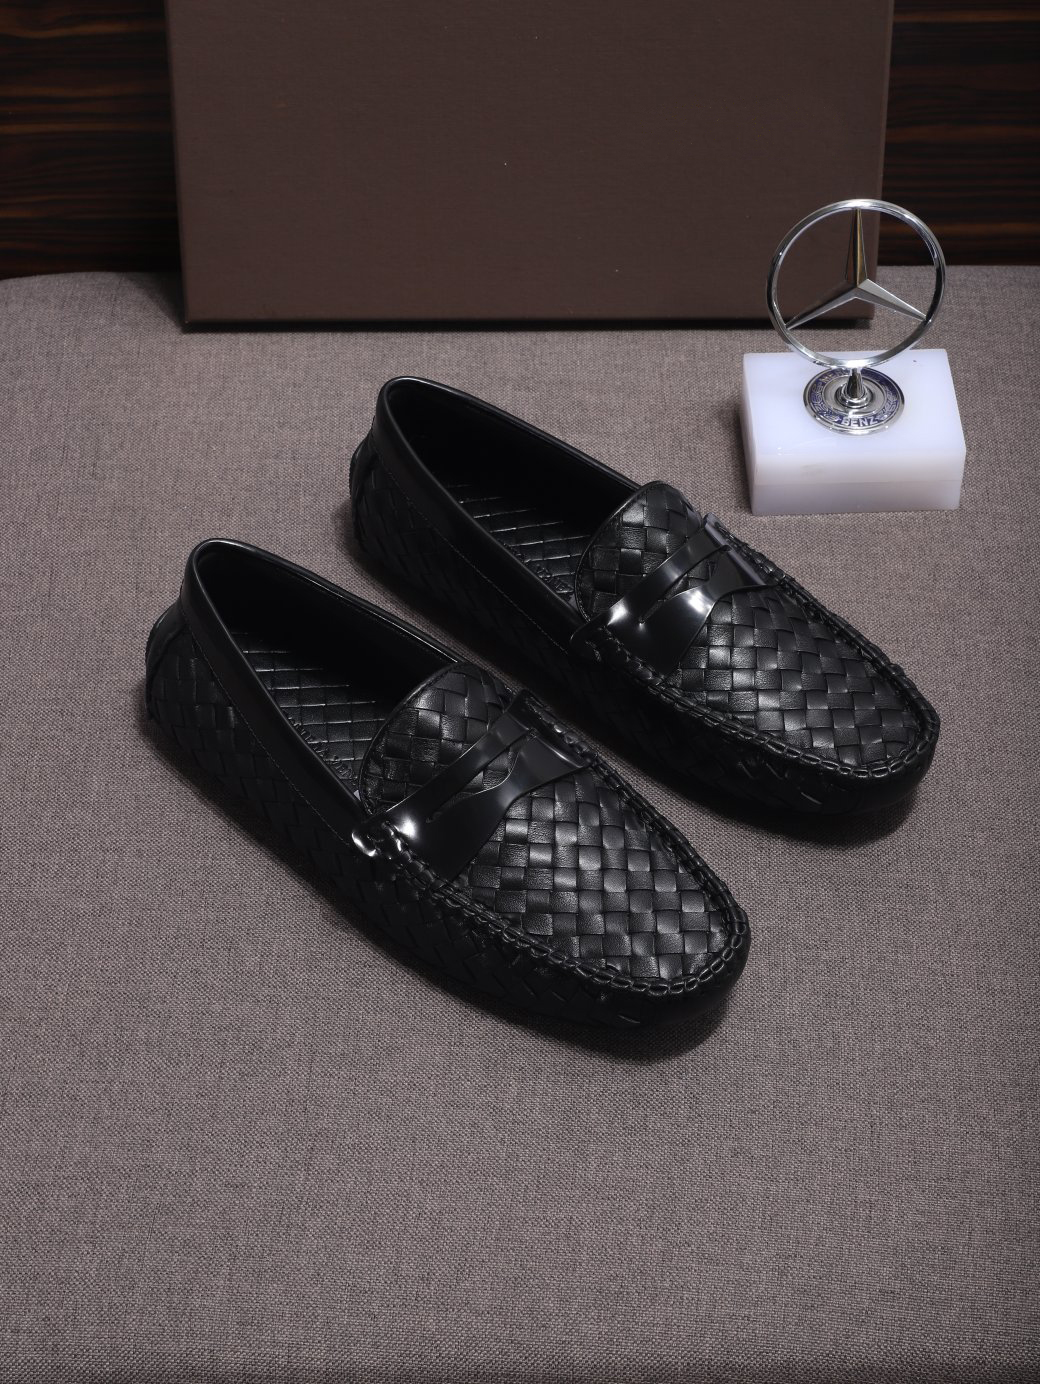 Custom Made Italian Leisure Shoes Black Woven Nappa Leather Loafers Size 38 To 46